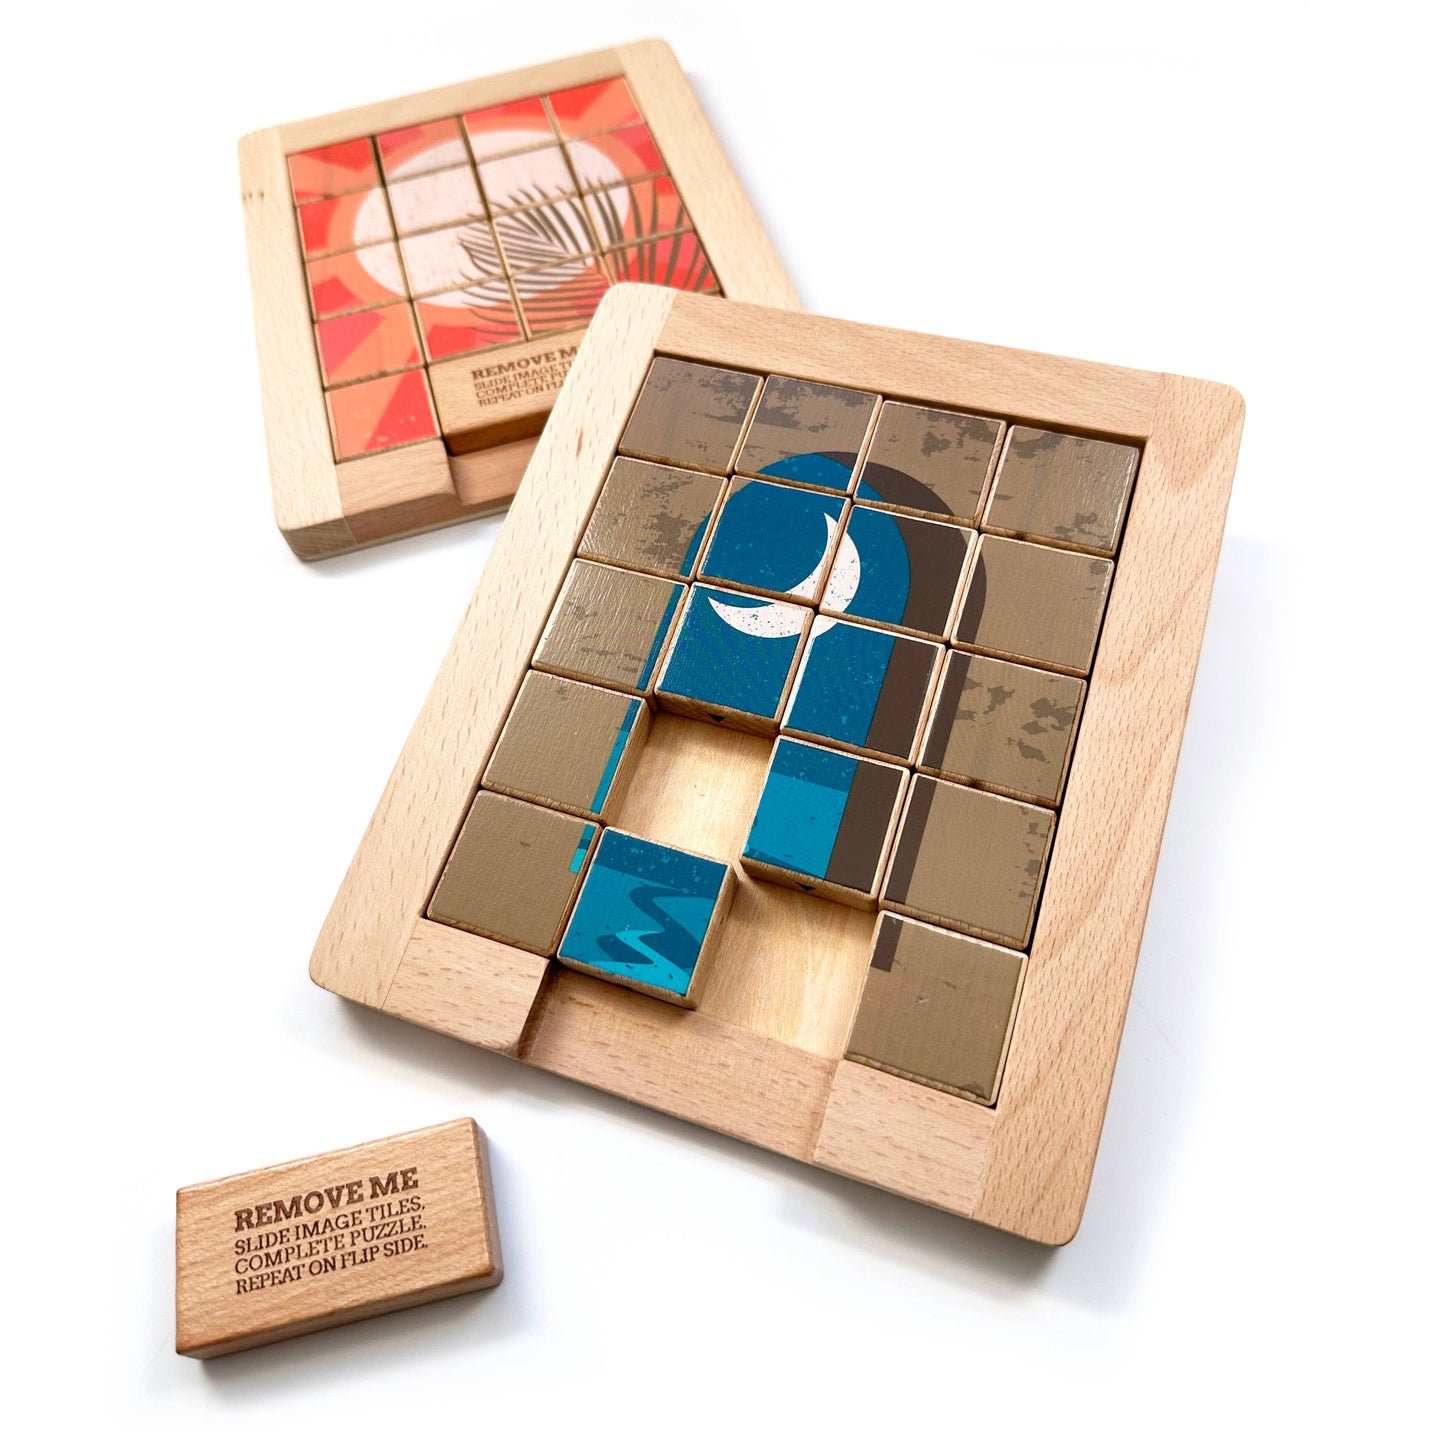 Trove - Dualities Wooden Sliding Puzzle Day v Night